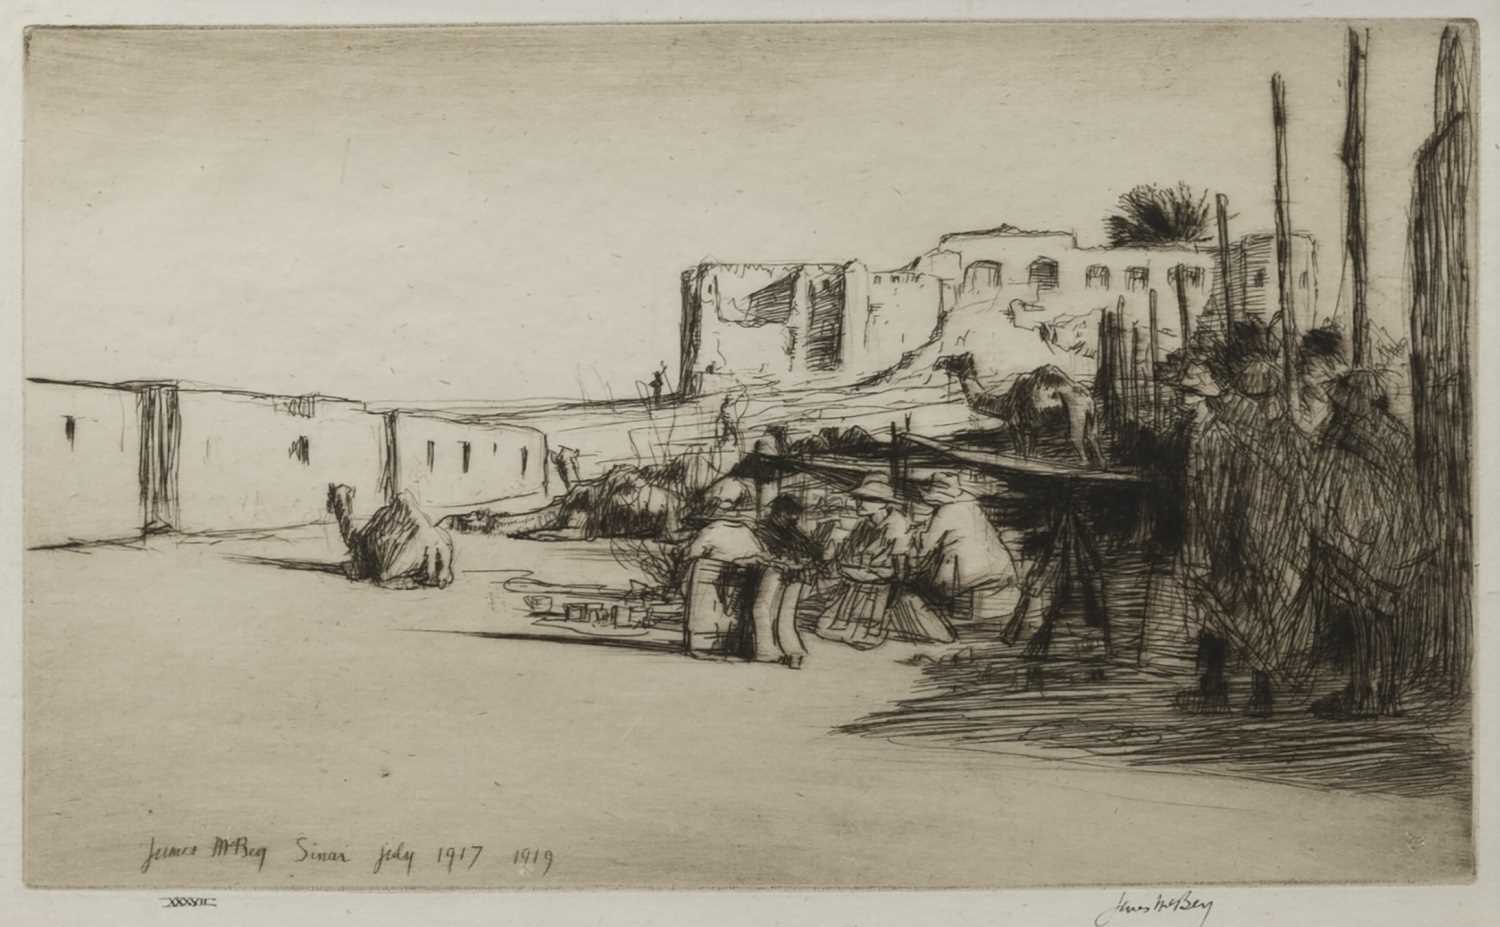 Lot 123 - A DESERTED OASIS, AN ETCHING BY JAMES MCBEY